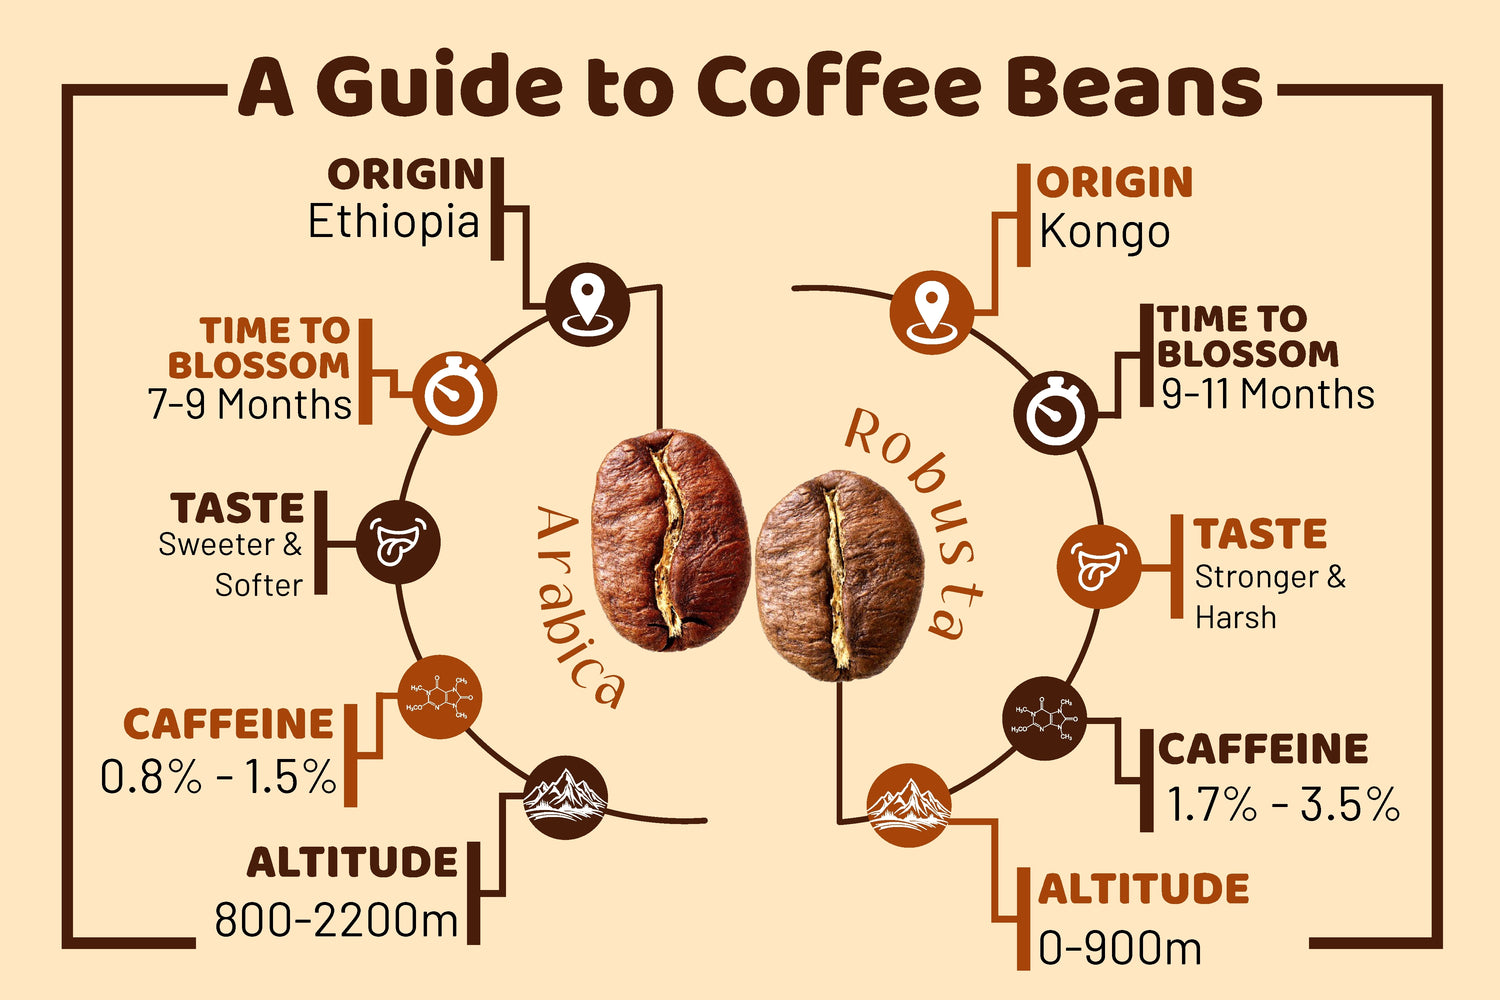 An image depicting the difference between Arabica and Robusta coffee beans. The image shows it in an infographic format with various factors like taste, flavours, preparation time being shown.